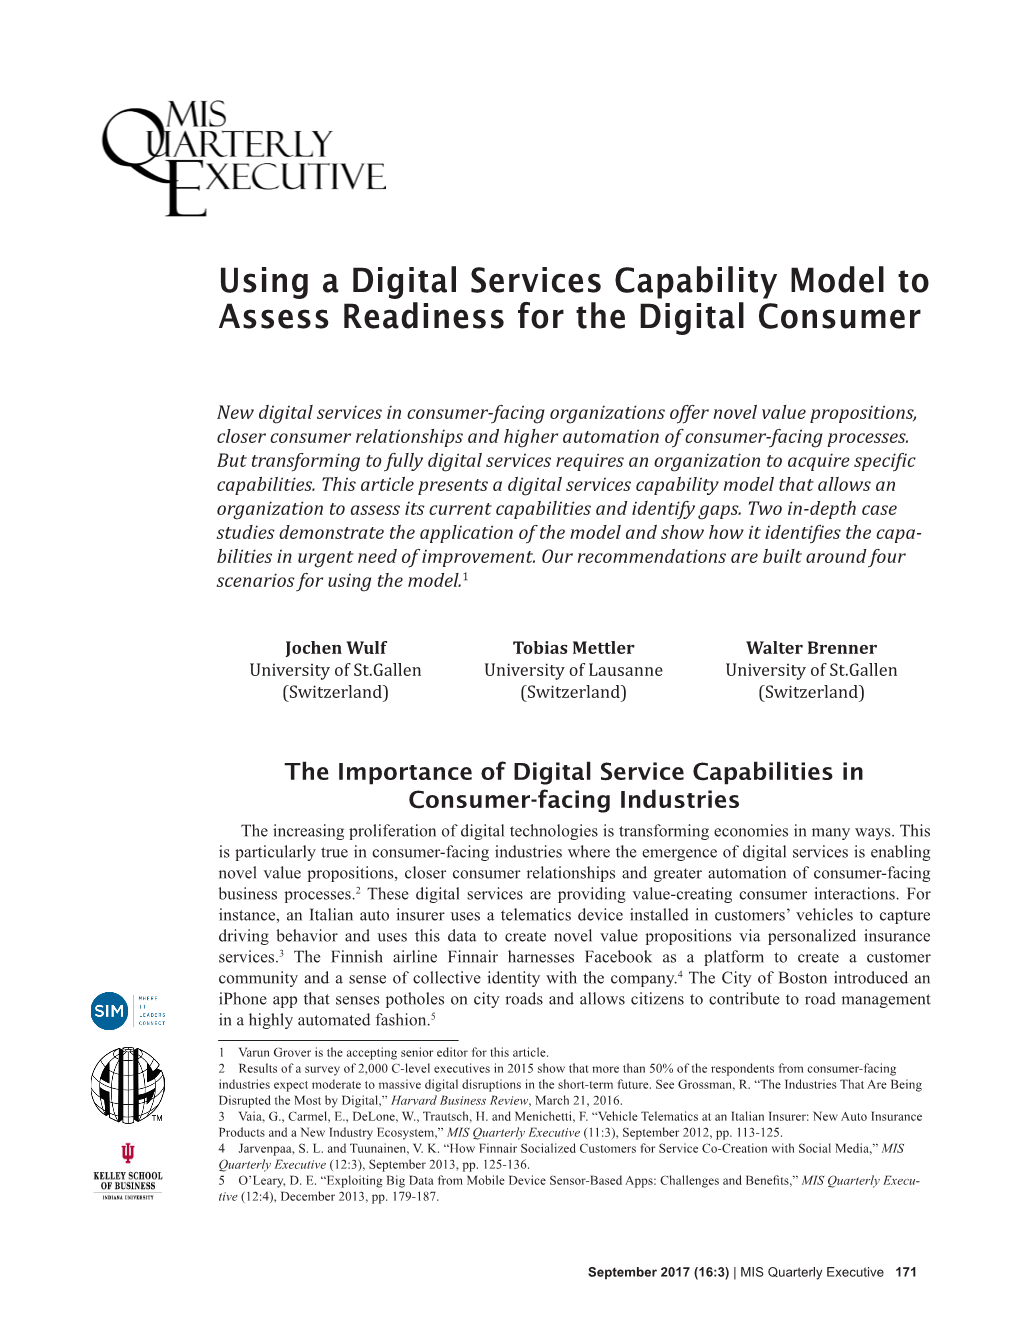 Using a Digital Services Capability Model to Assess Readiness for the Digital Consumer